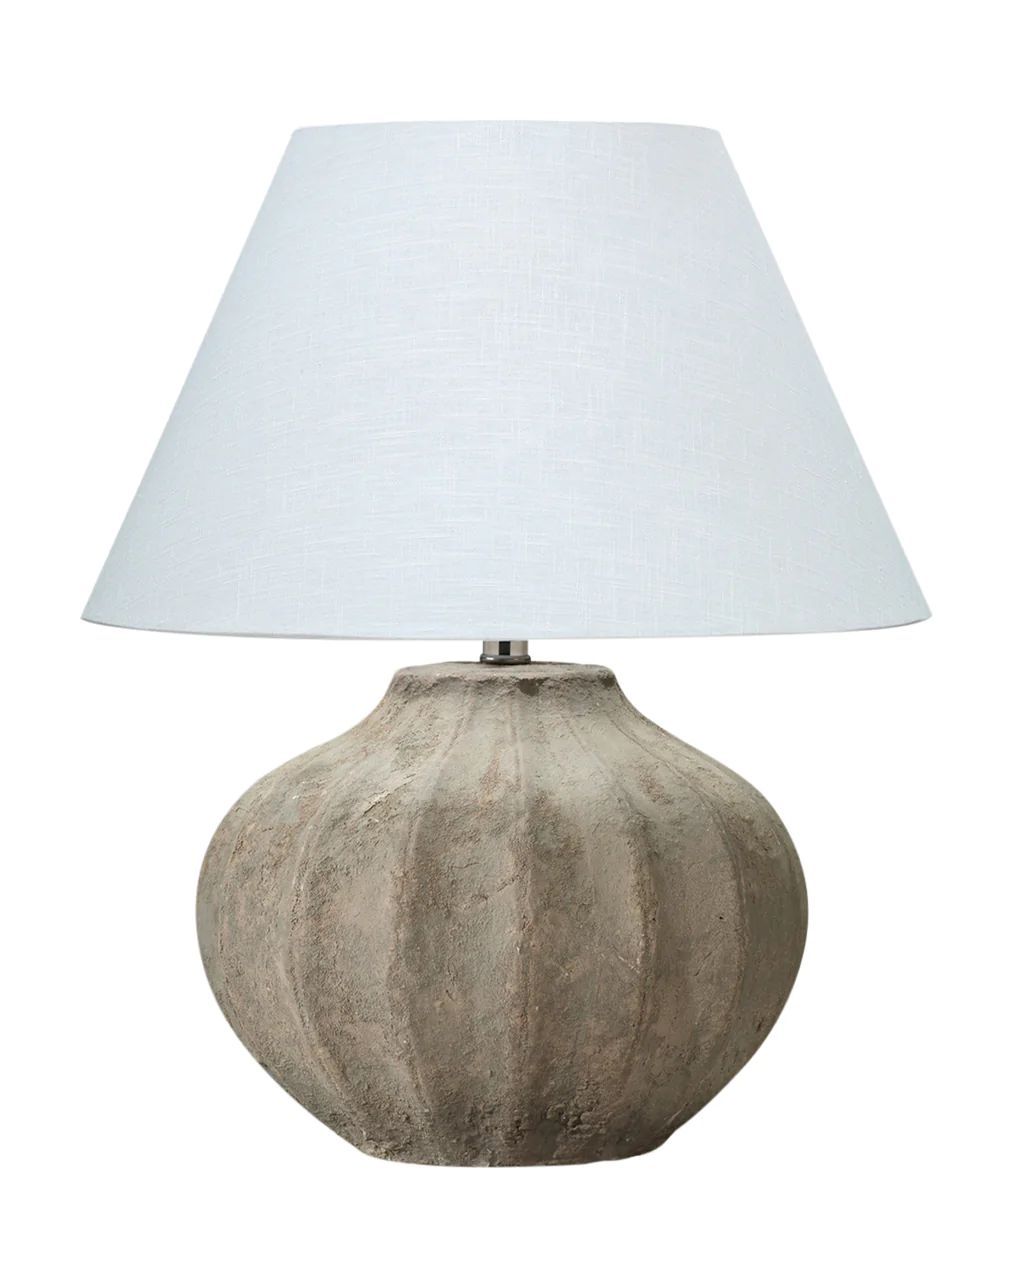 Clamshell Table Lamp | McGee & Co.